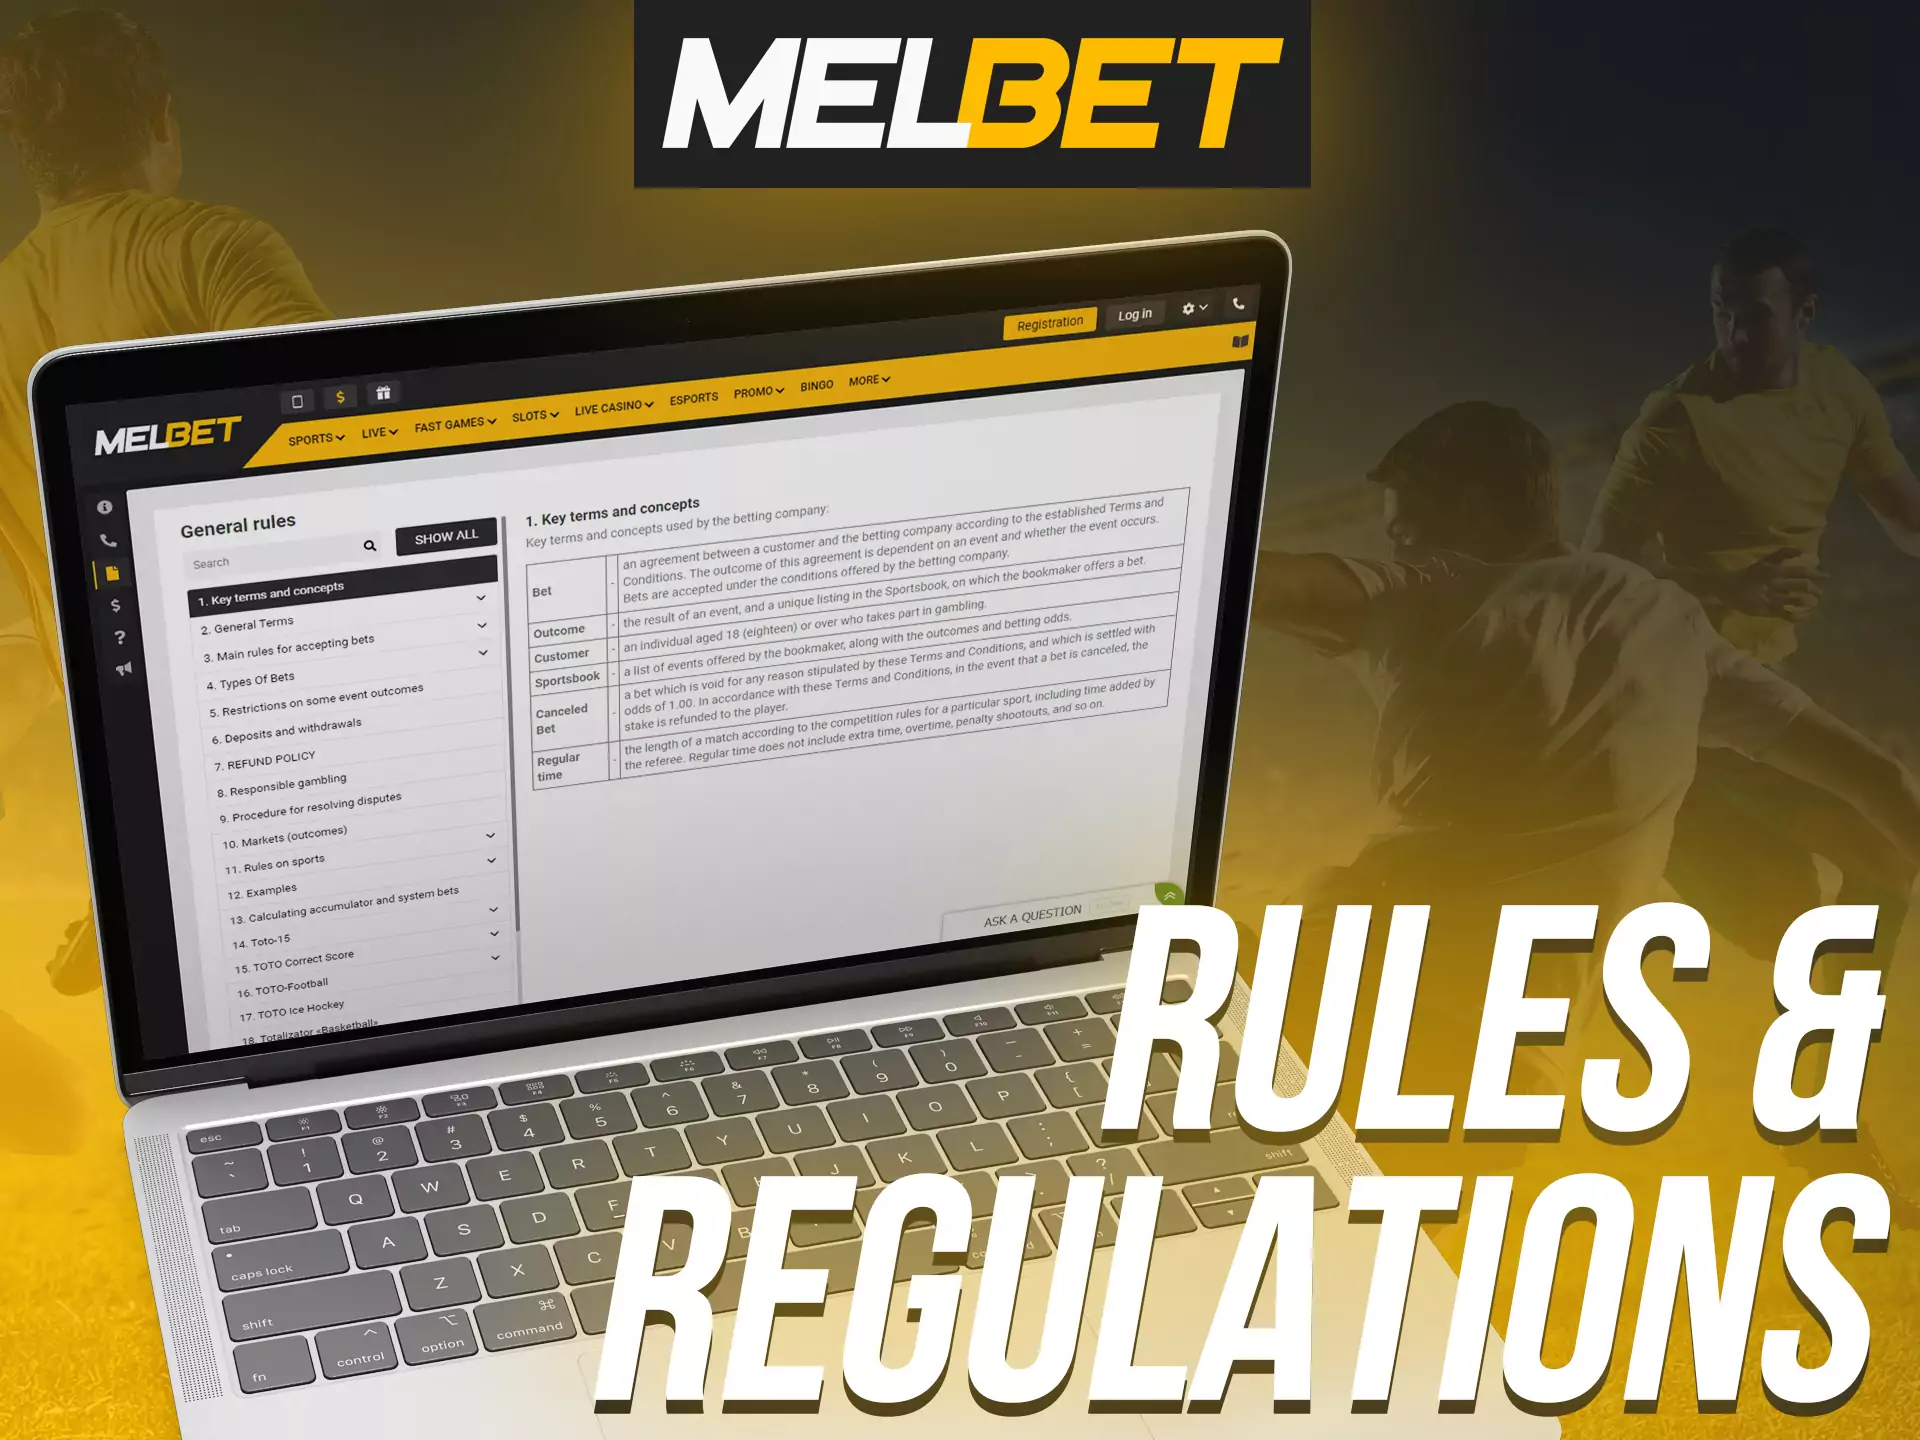 Follow Melbet rules for better betting quality.